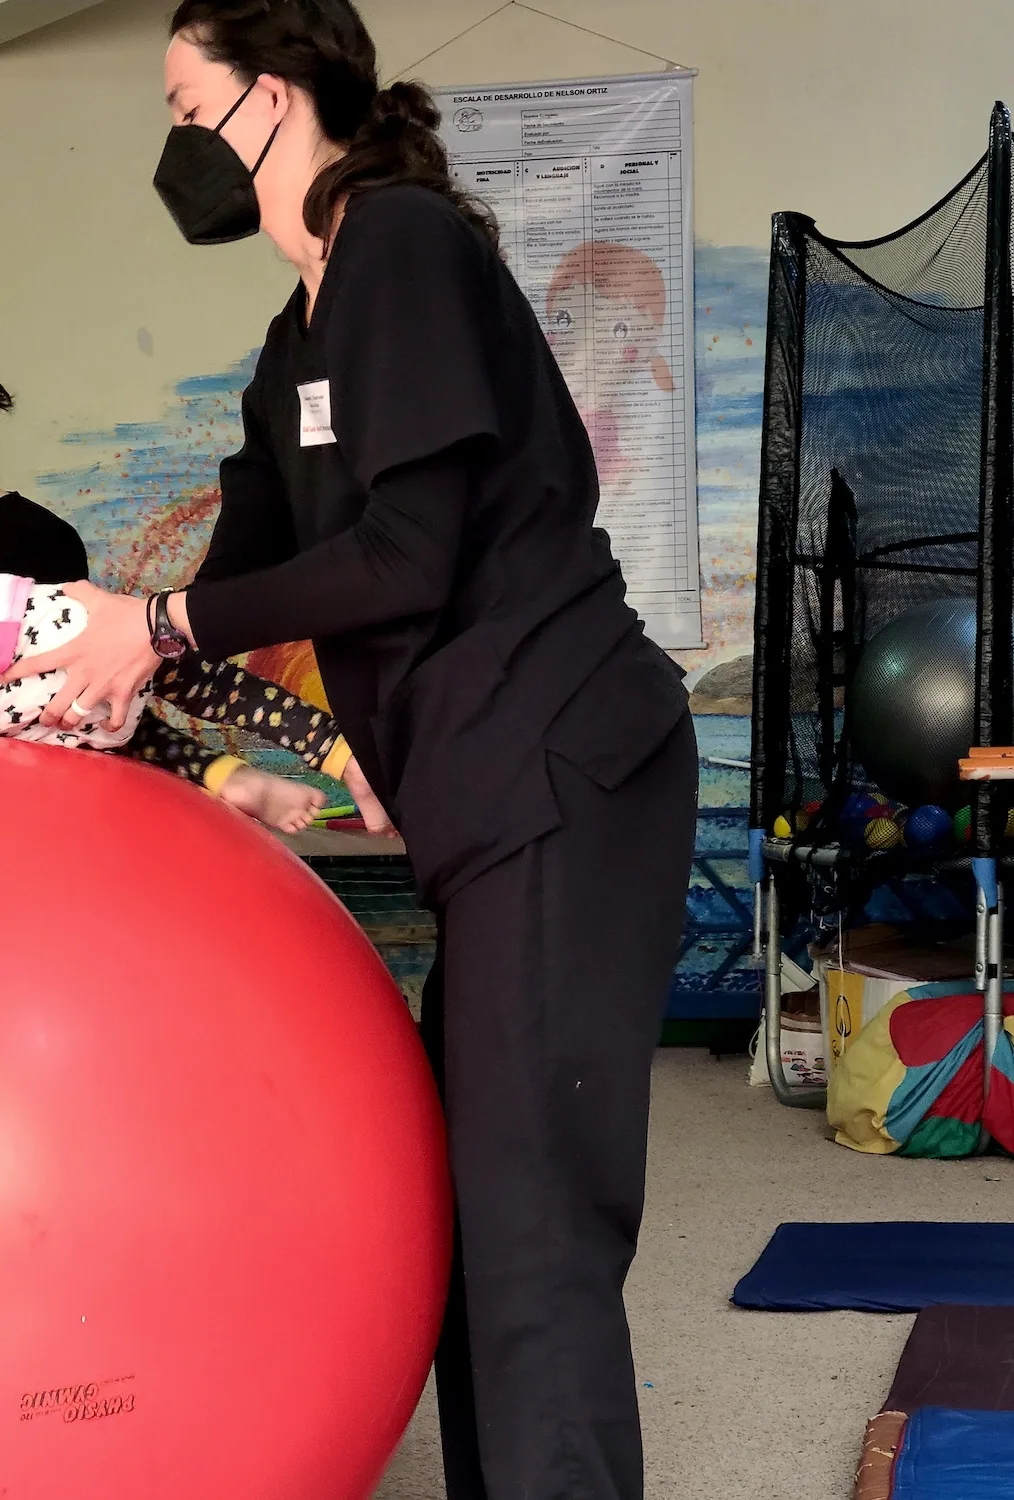 A PT student helping a patient with an exercise ball.